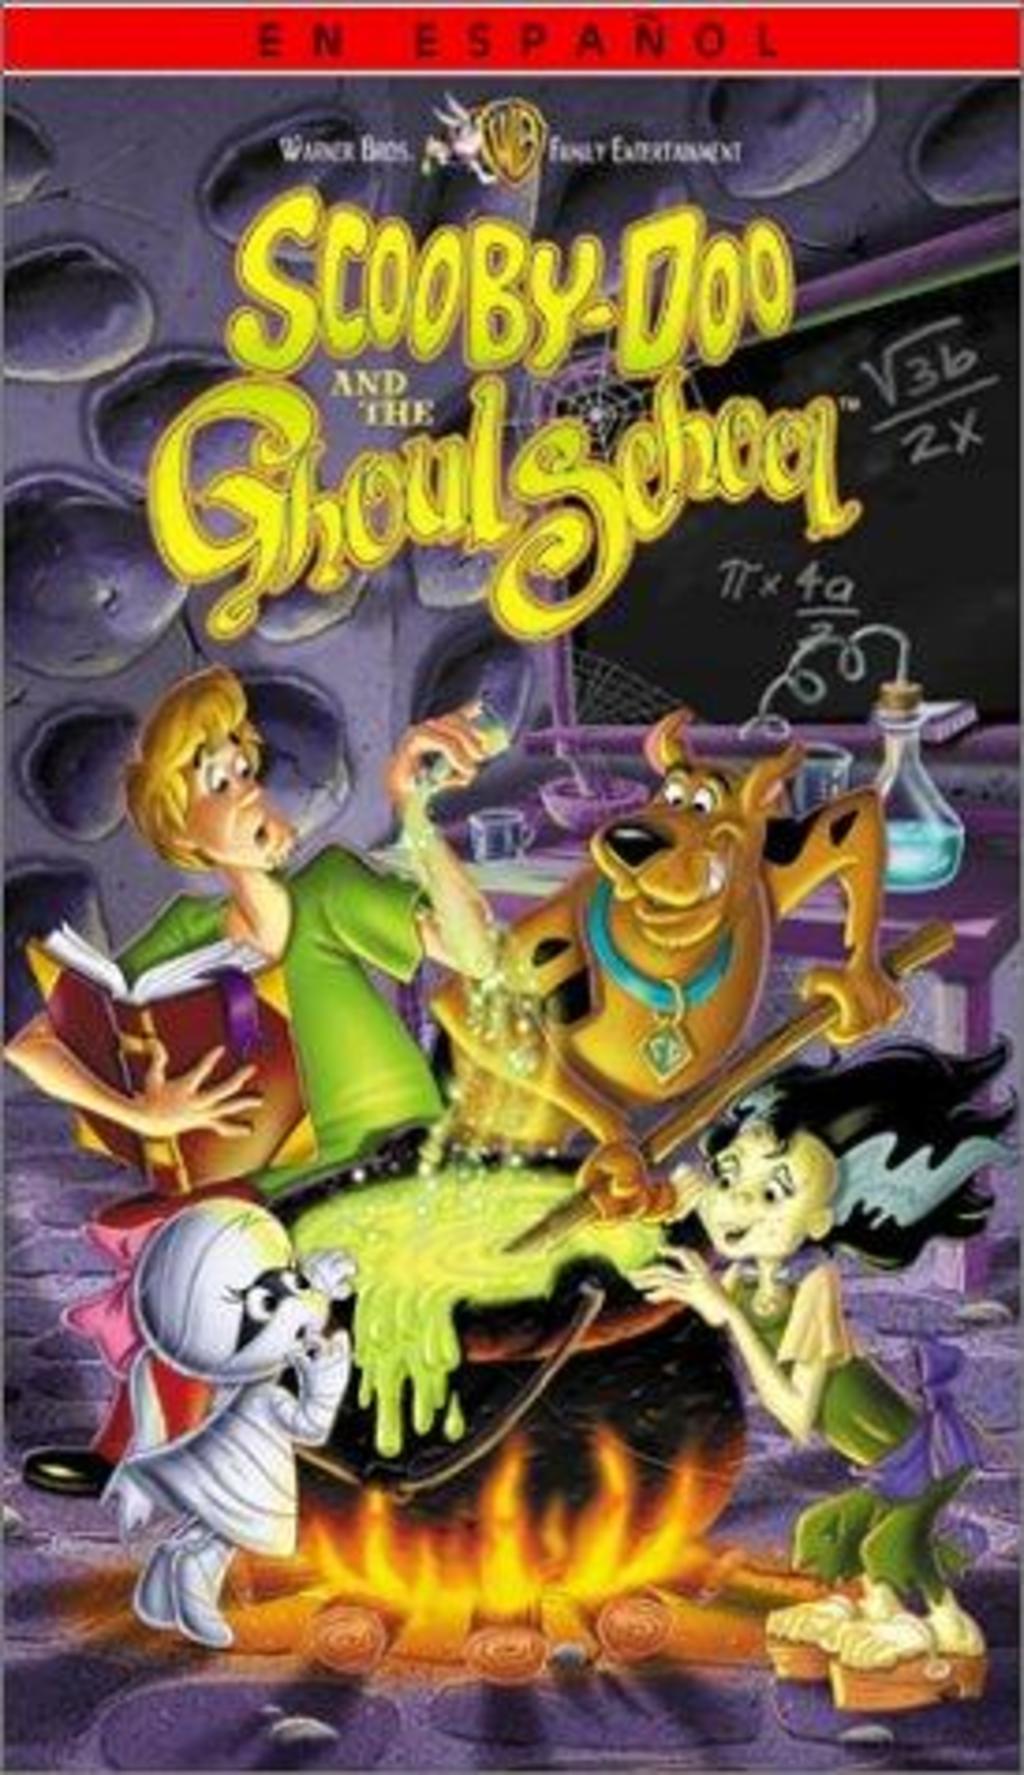 Watch Scooby-Doo and the Ghoul School on Netflix Today! | NetflixMovies.com